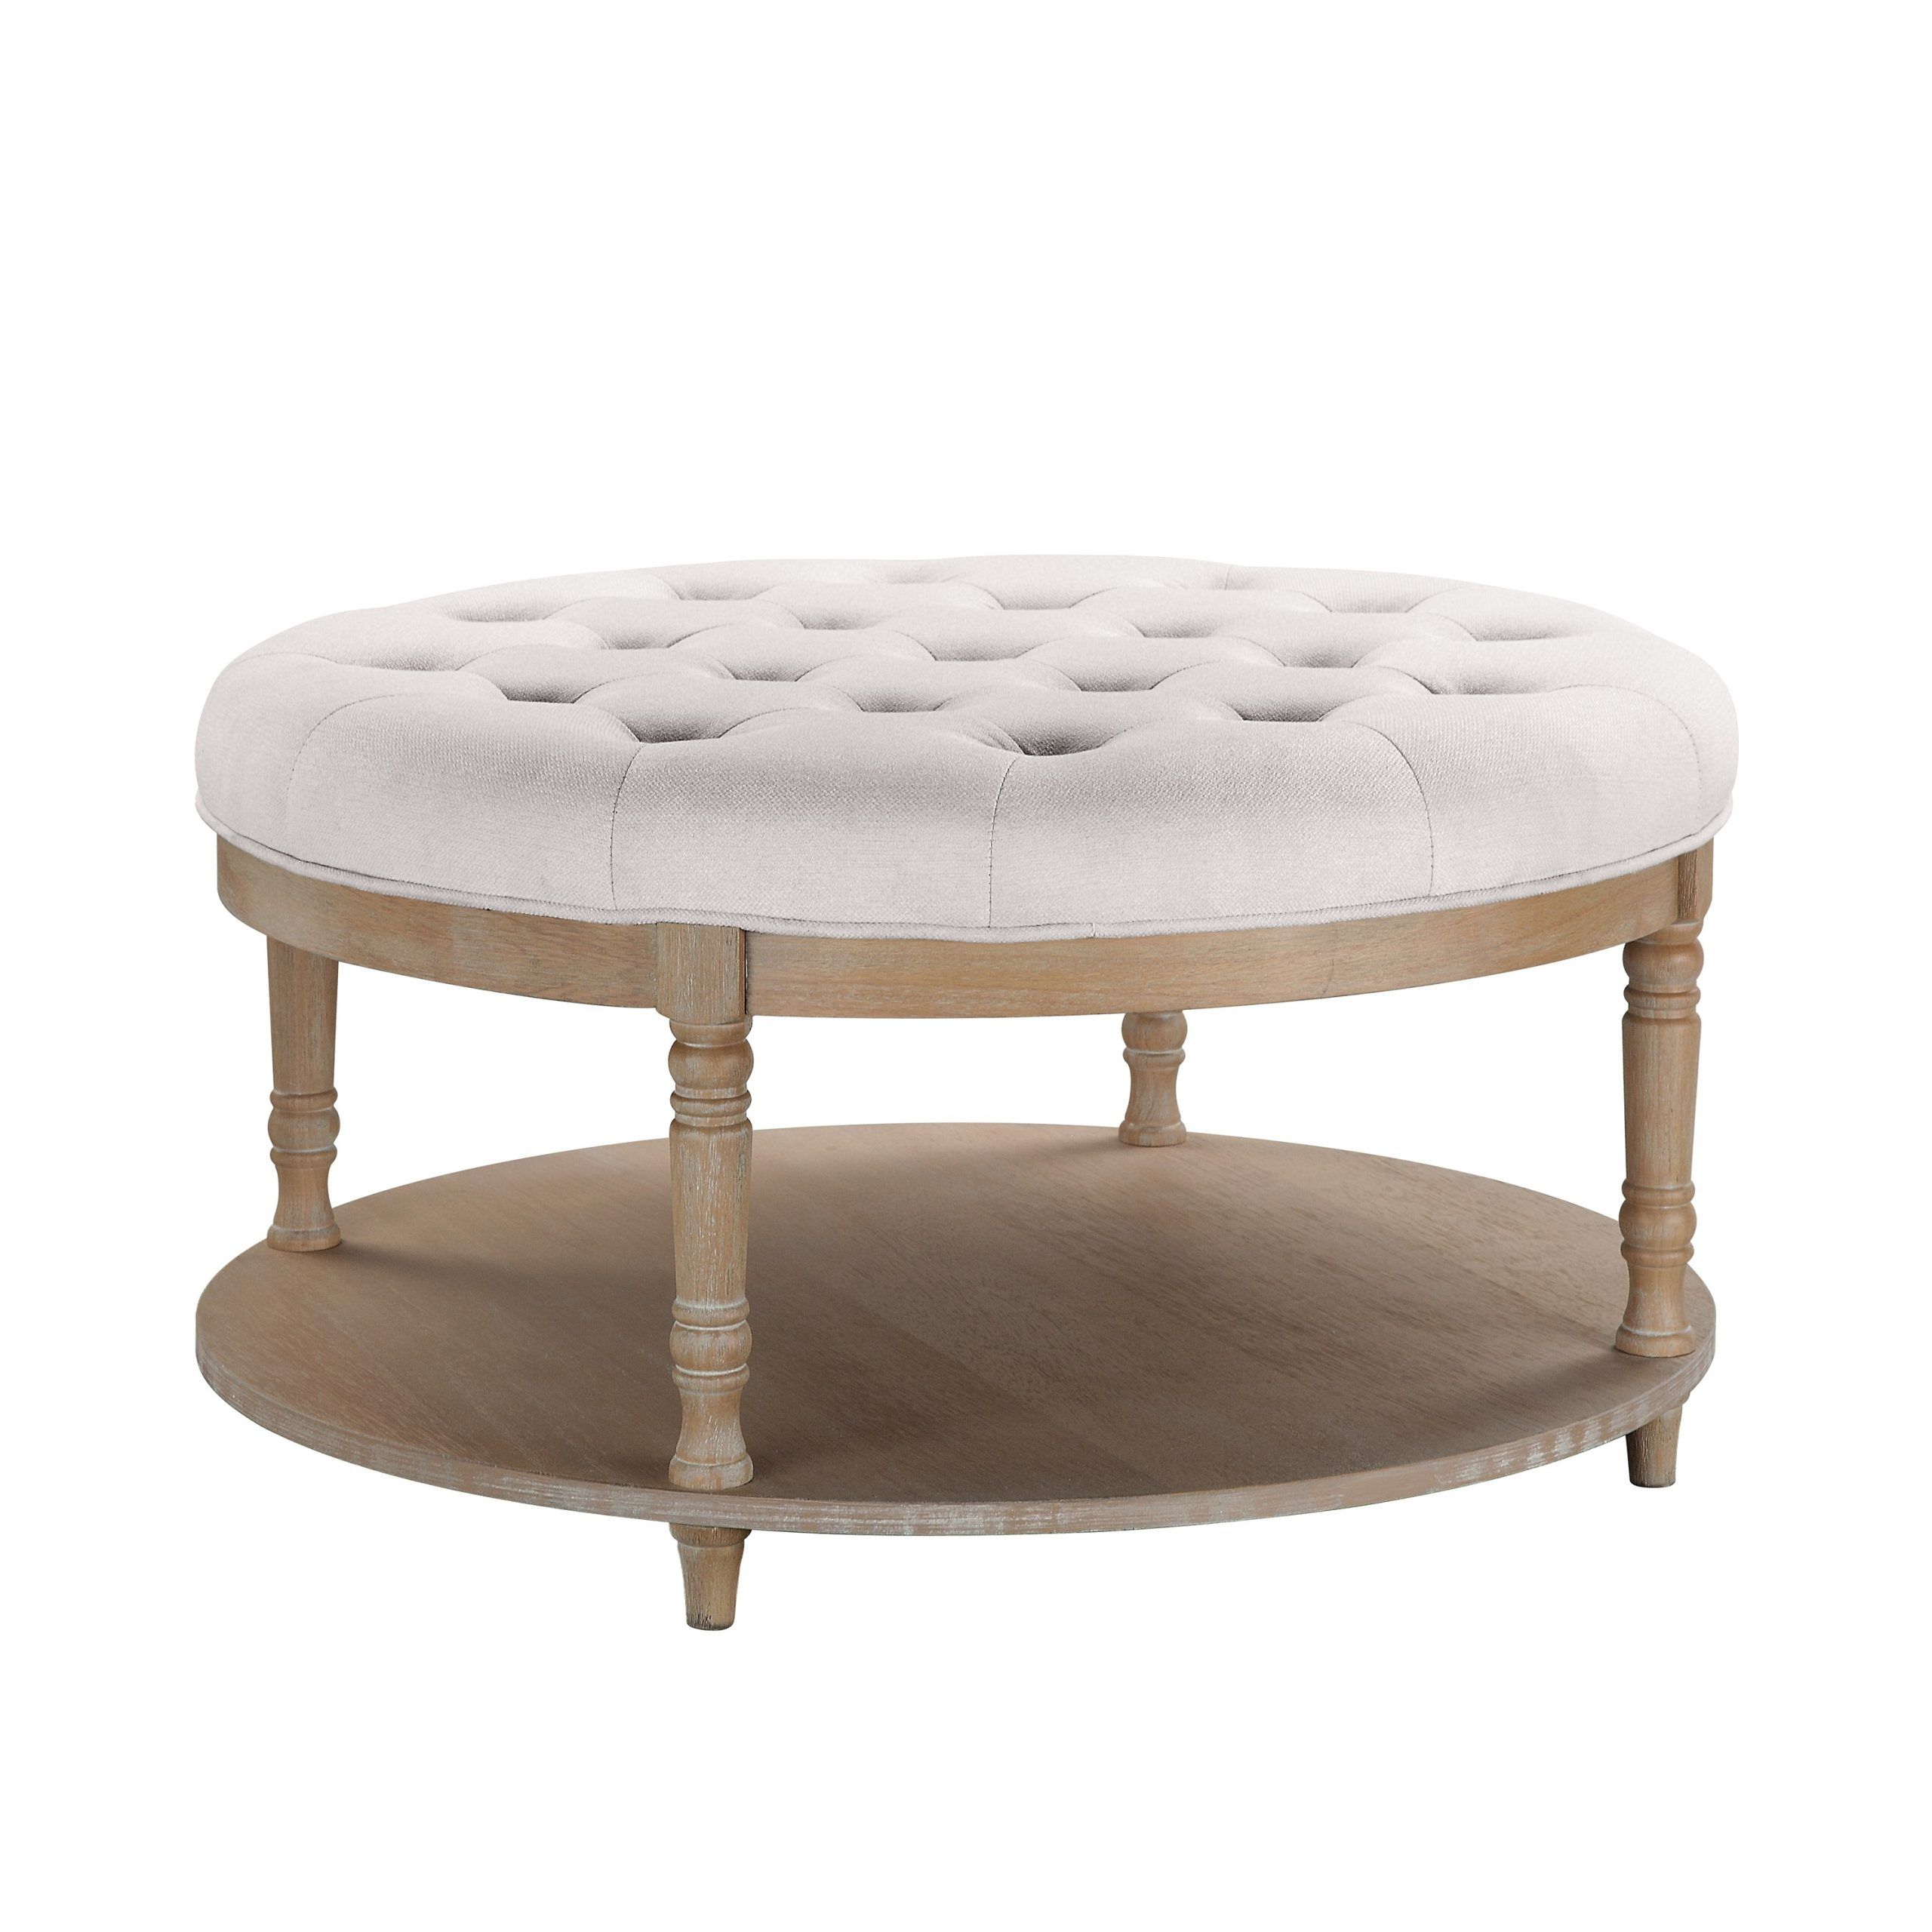 Corvus Savannah 36 Inch Round Storage Tufted Chesterfield Cocktail Ottoman  – Overstock – 33992910 Intended For 36 Inch Round Ottomans (View 6 of 15)